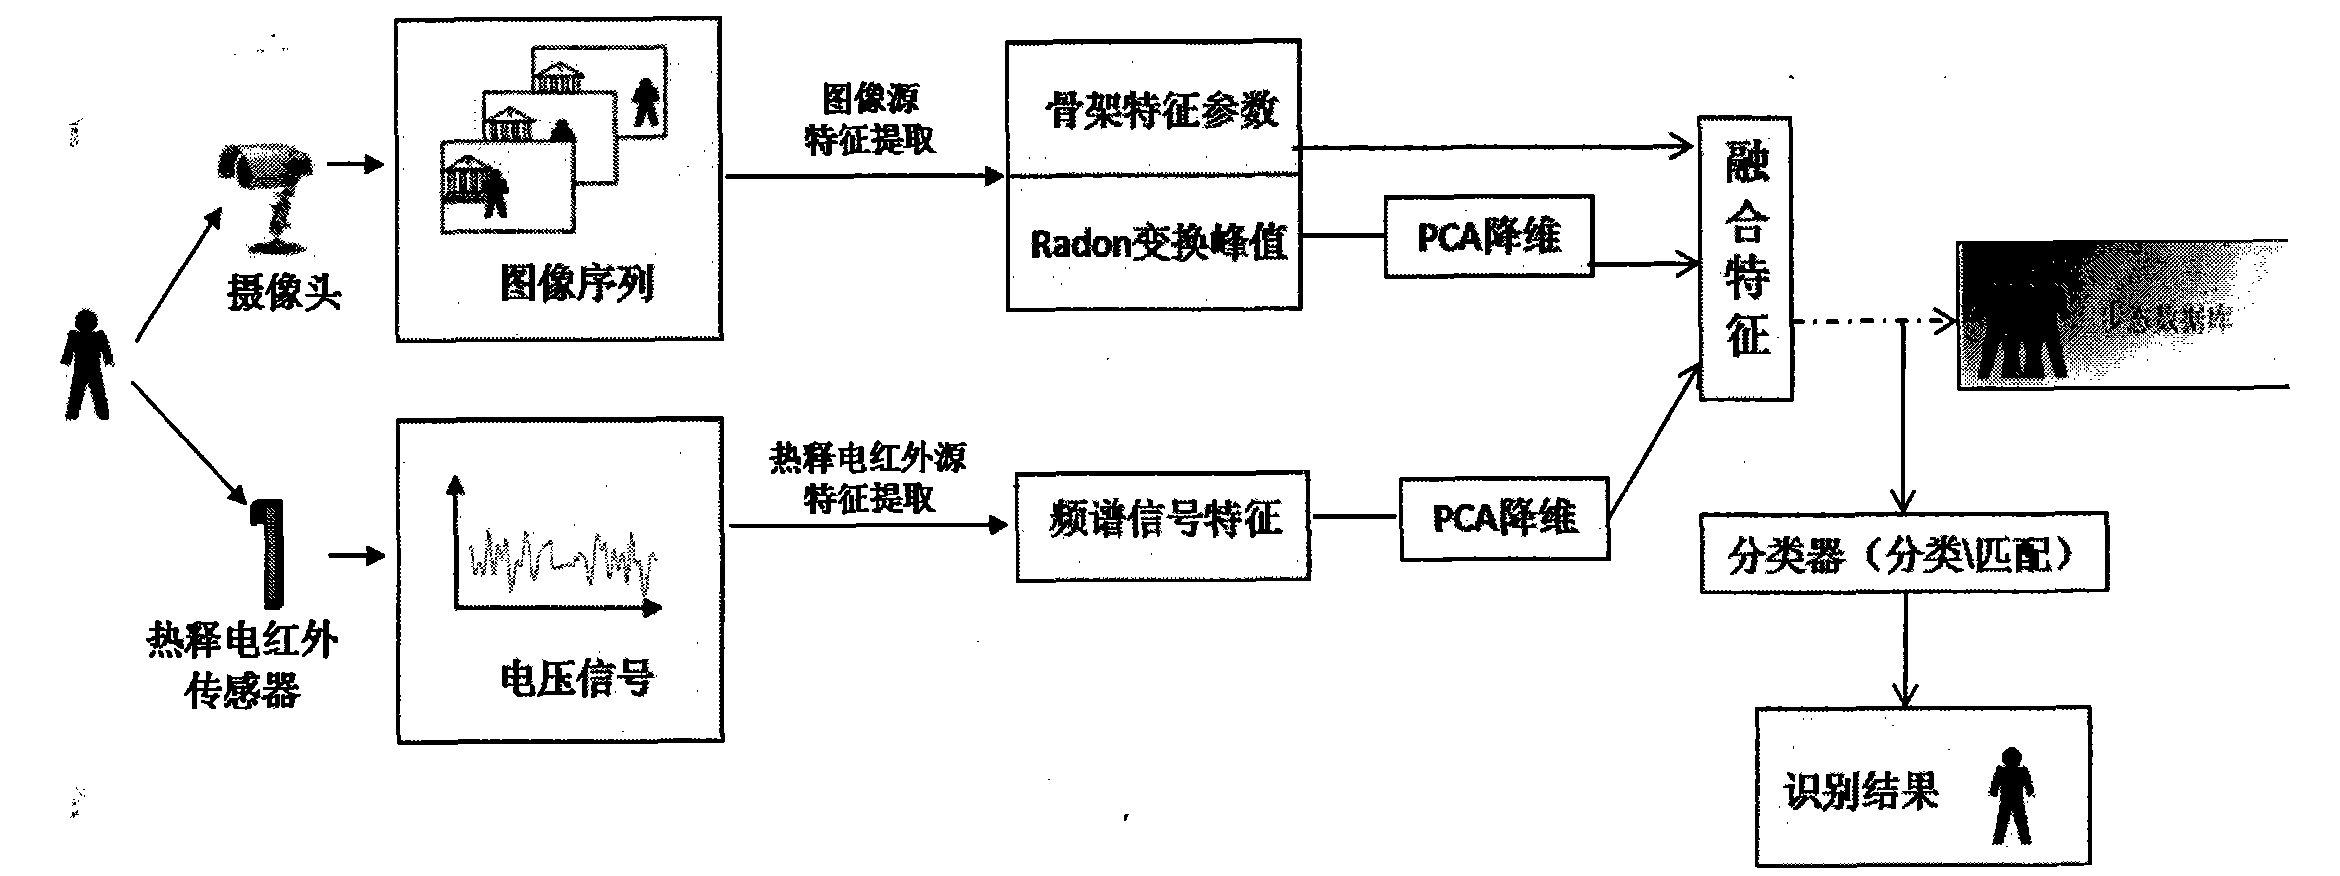 Artificial neural network-based multi-source gait feature extraction and identification method